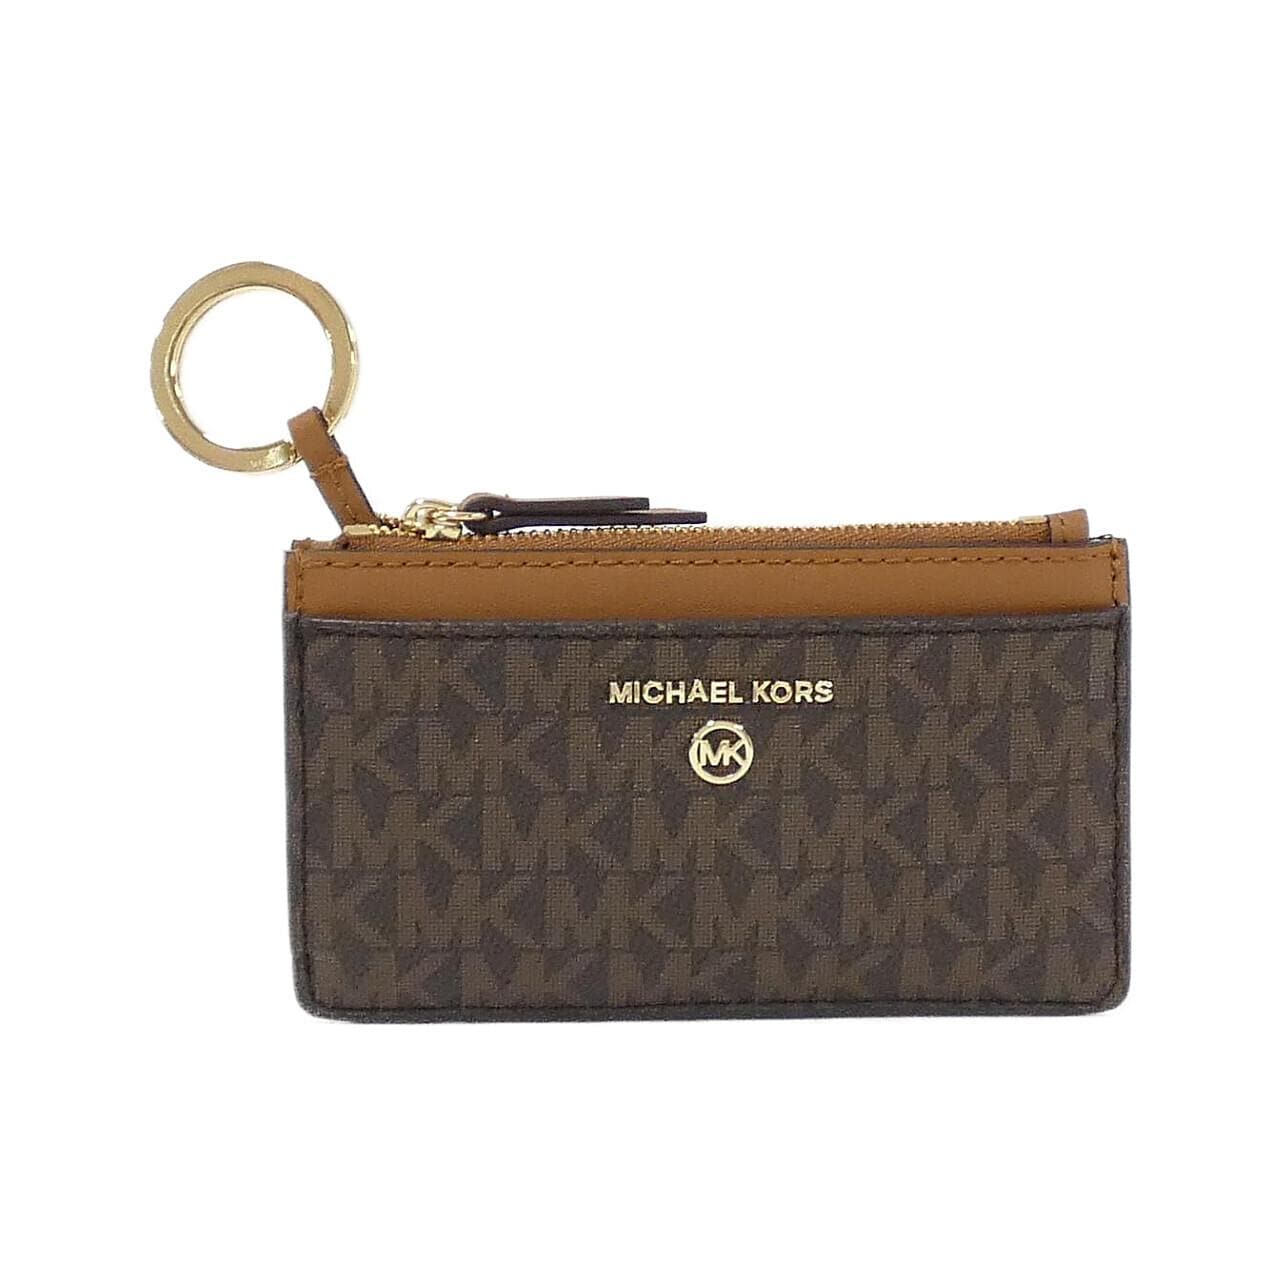 Michael Kors Purses and Wallets | House of Fraser